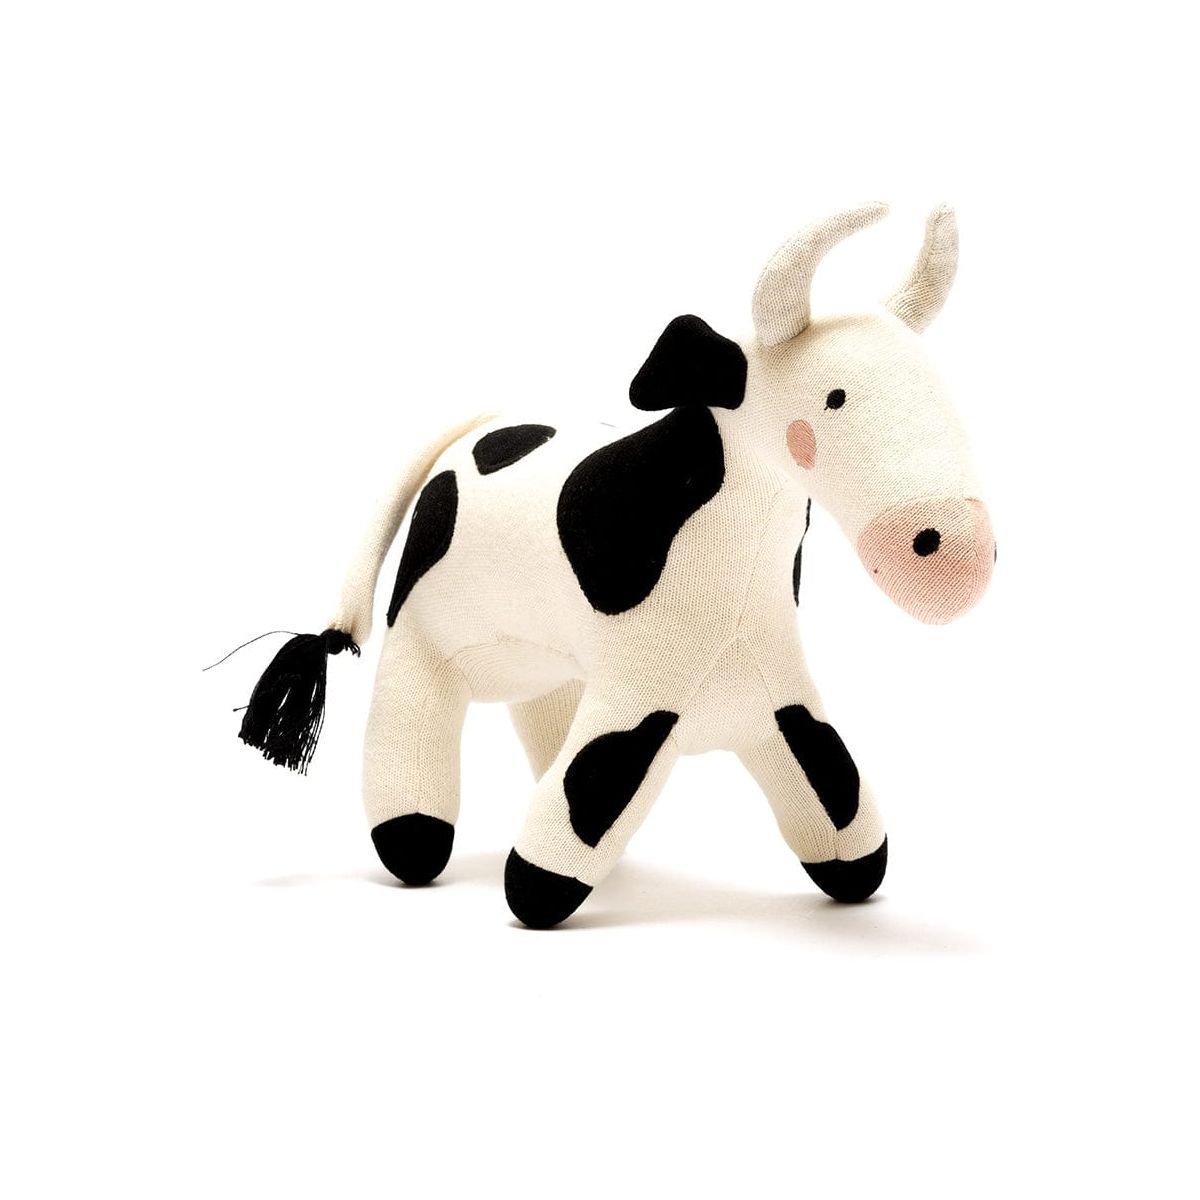 Best Years Ltd Knitted Organic Cotton Cow Soft Toy